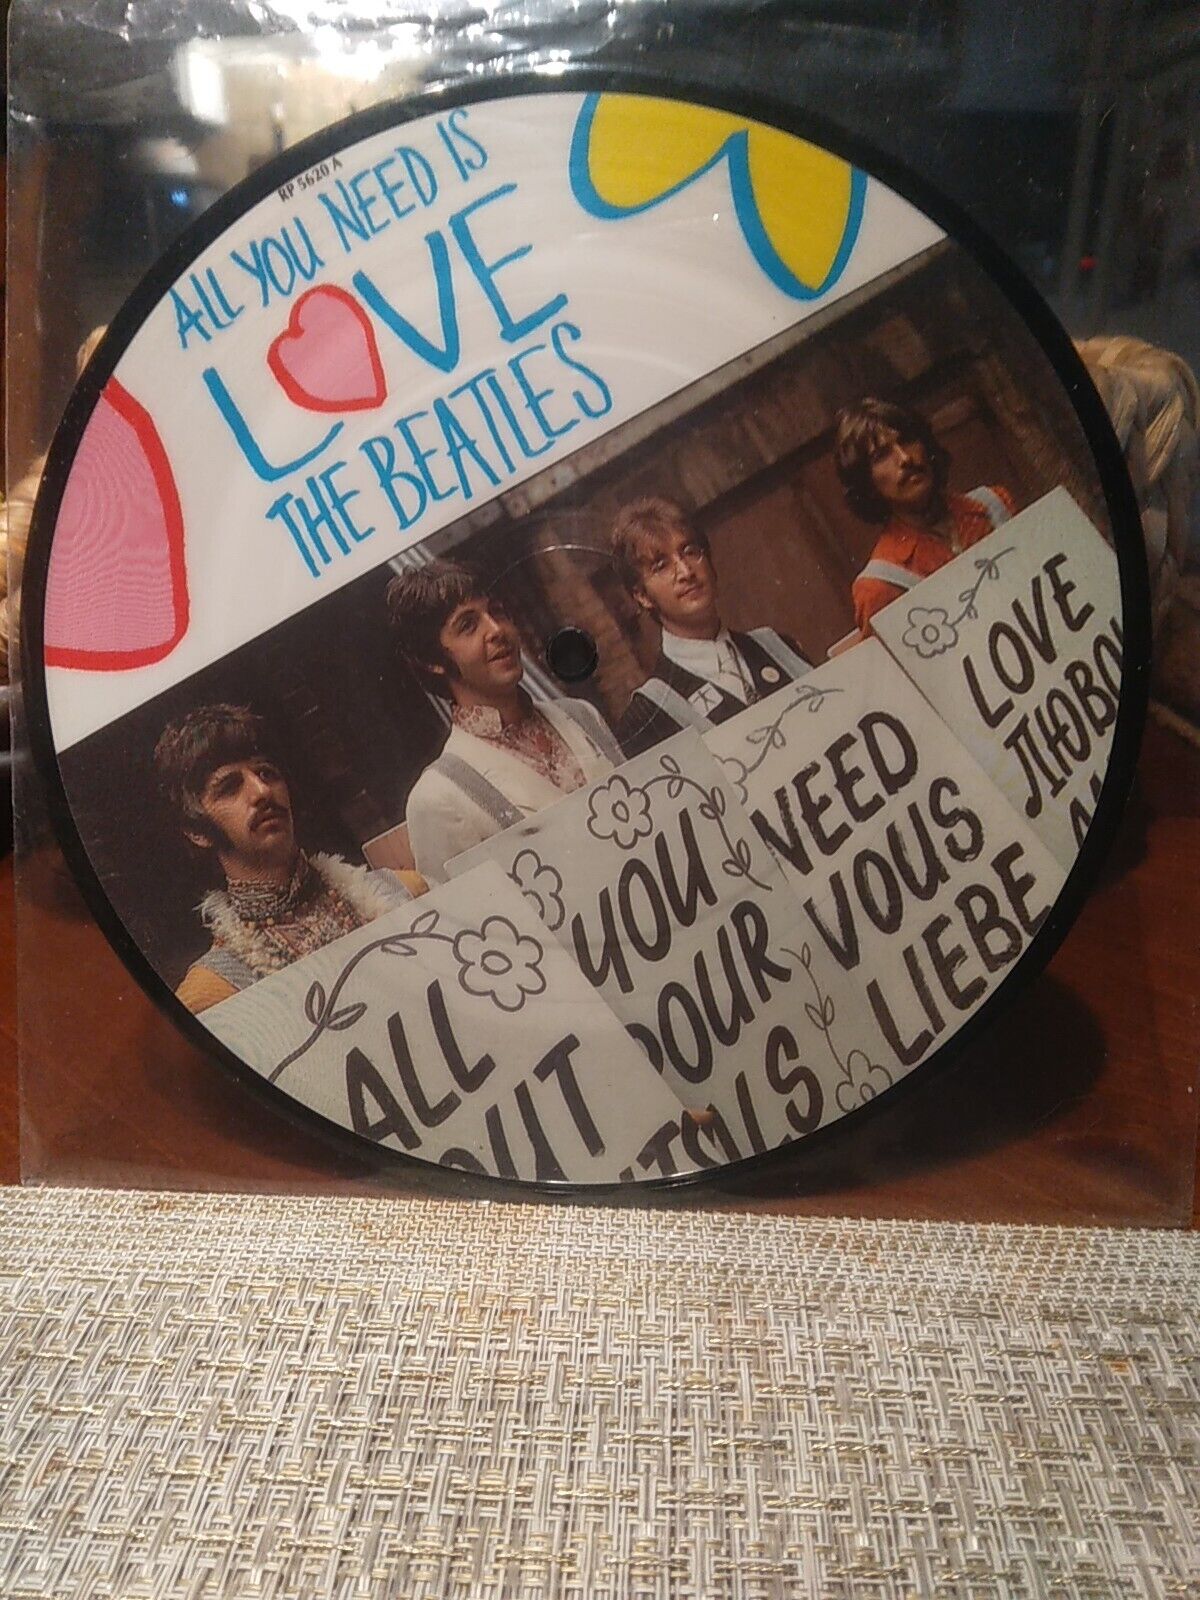 The Beatles - All You Need Is Love -  1987 UK Picture Disc Vintage Vinyl - Rare